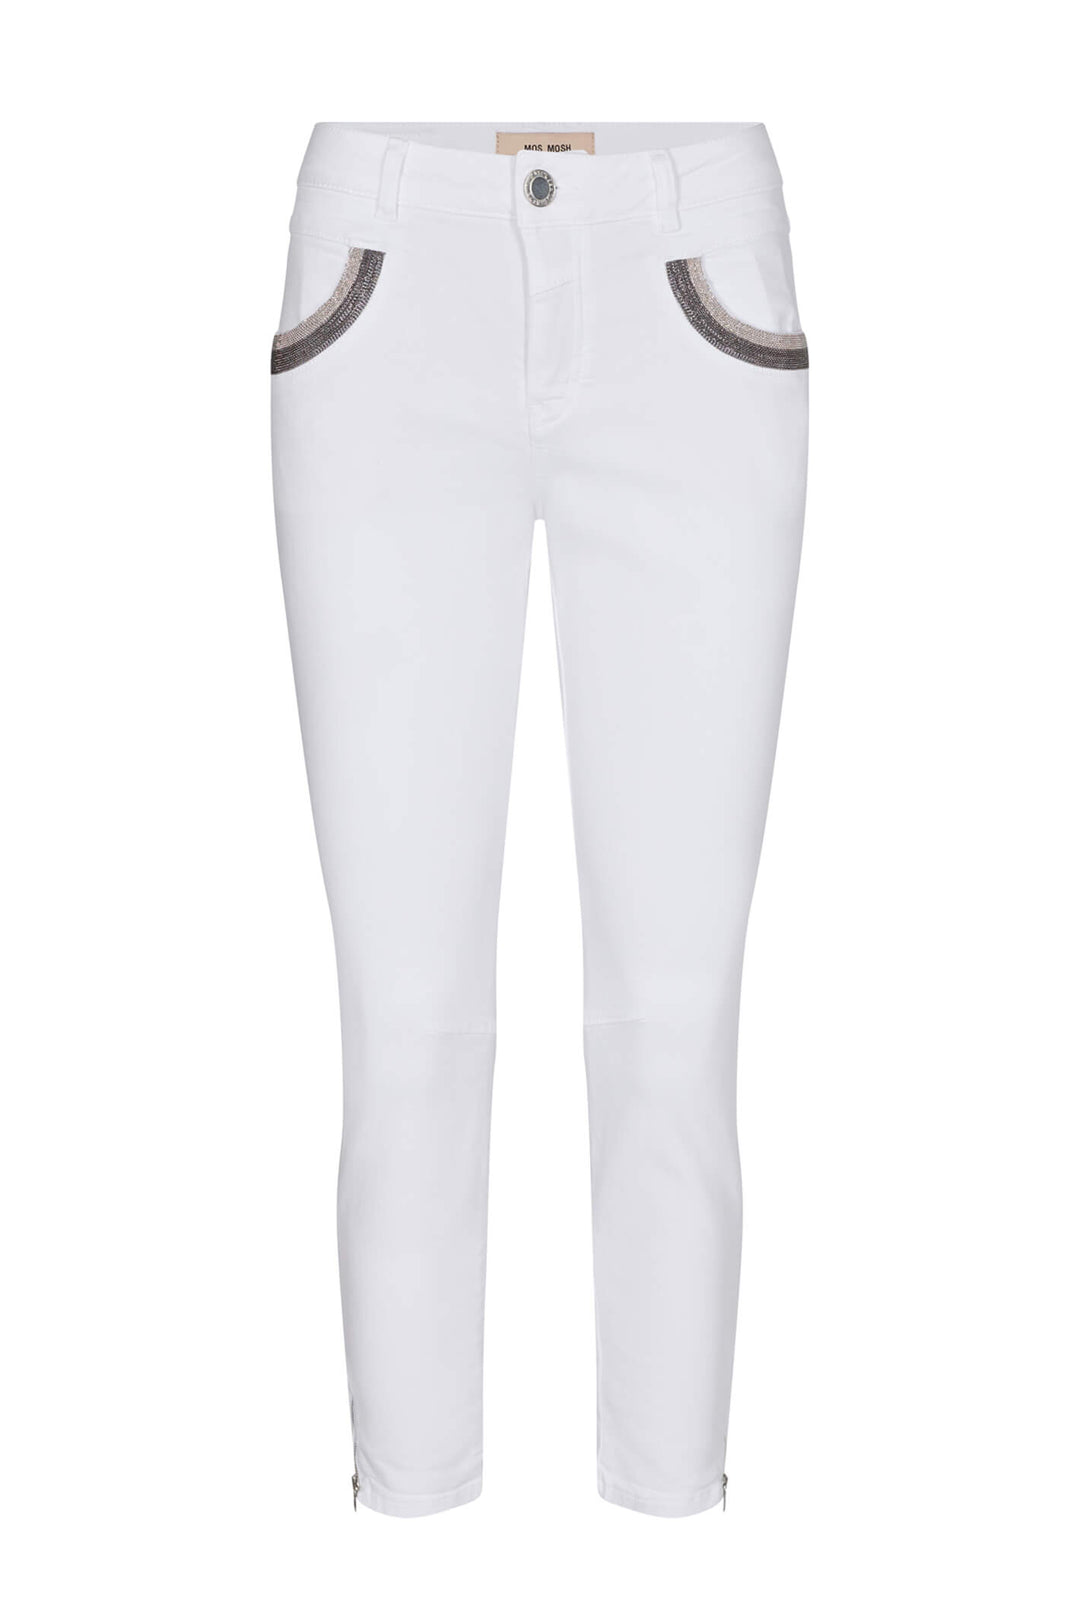 Mos Mosh Cropped Naomi Shade White Jeans - Dotique